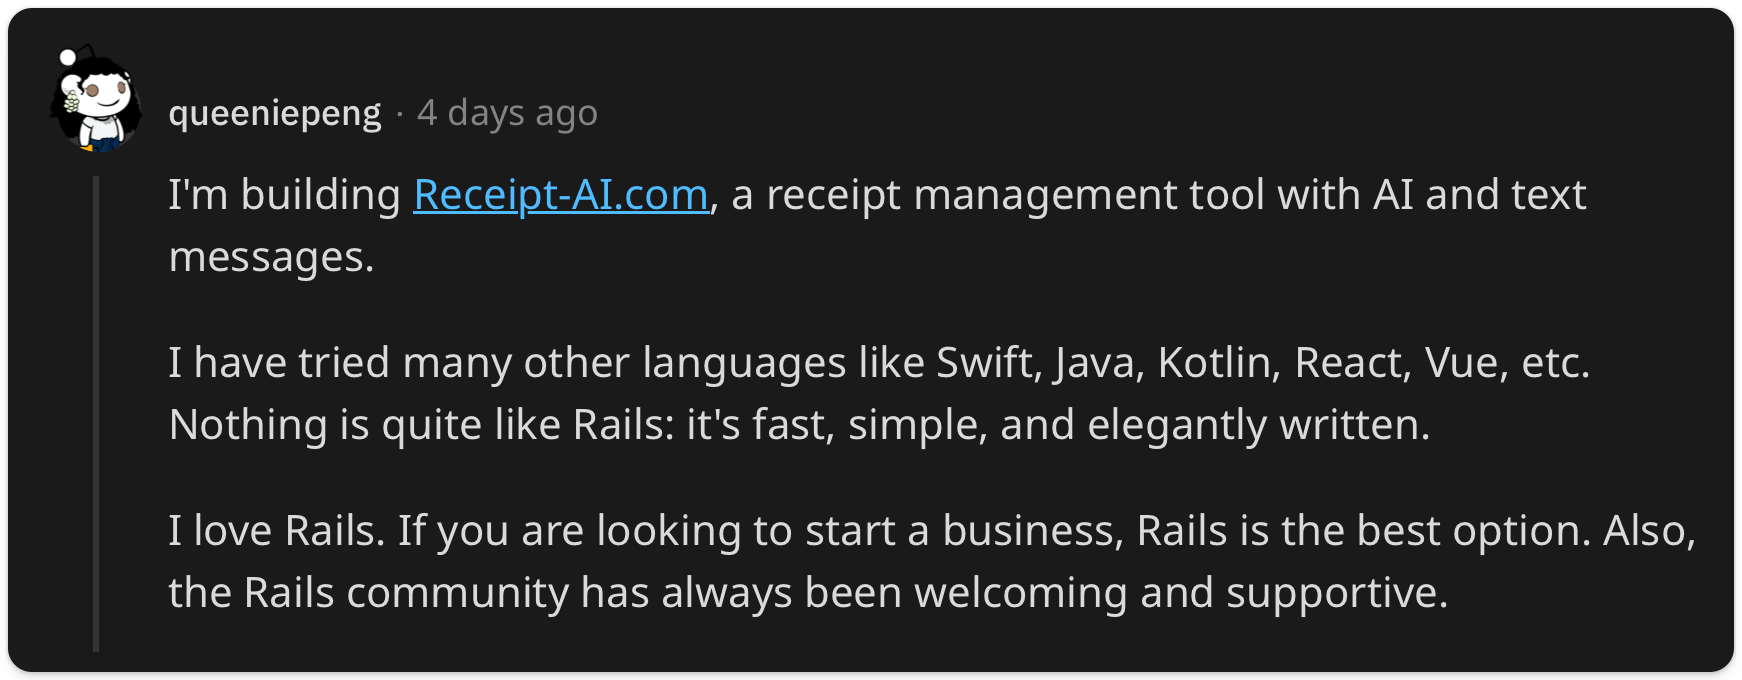 "I'm building Receipt-AI.com, a receipt management tool with AI and text messages. I have tried many other languages like Swift, Java, Kotlin, React, Vue, etc. Nothing is quite like Rails: it's fast, simple, and elegantly written. I love Rails. If you are looking to start a business, Rails is the best option. Also, the Rails community has always been welcoming and supportive."